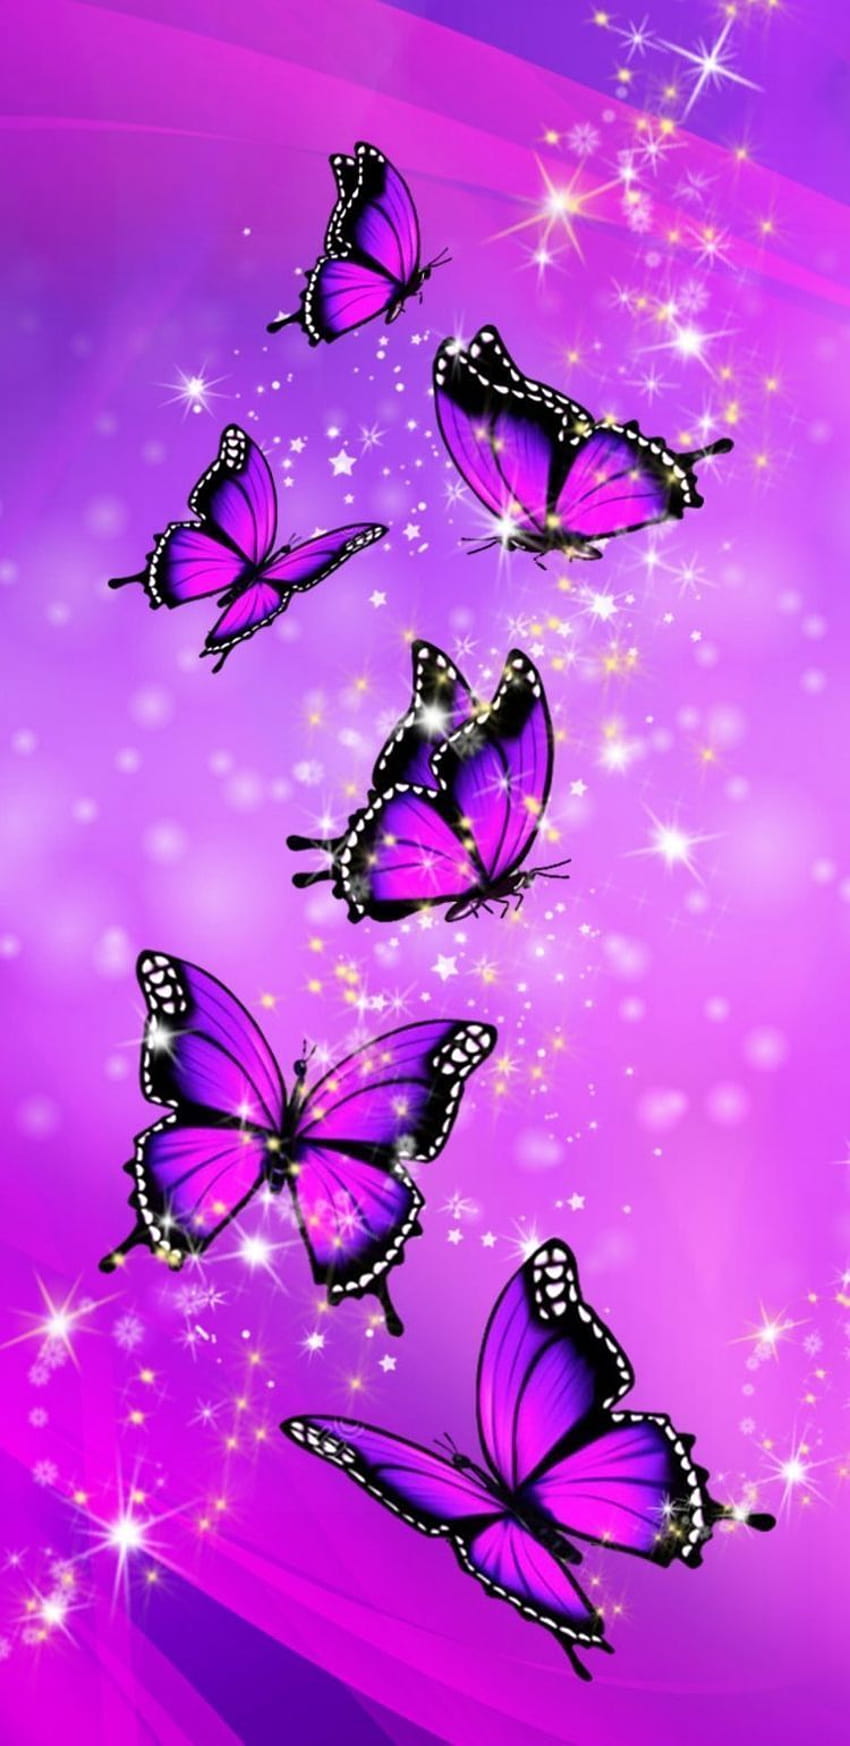 Butterfly iPhone on Dog, iphone purple butterfly HD phone wallpaper